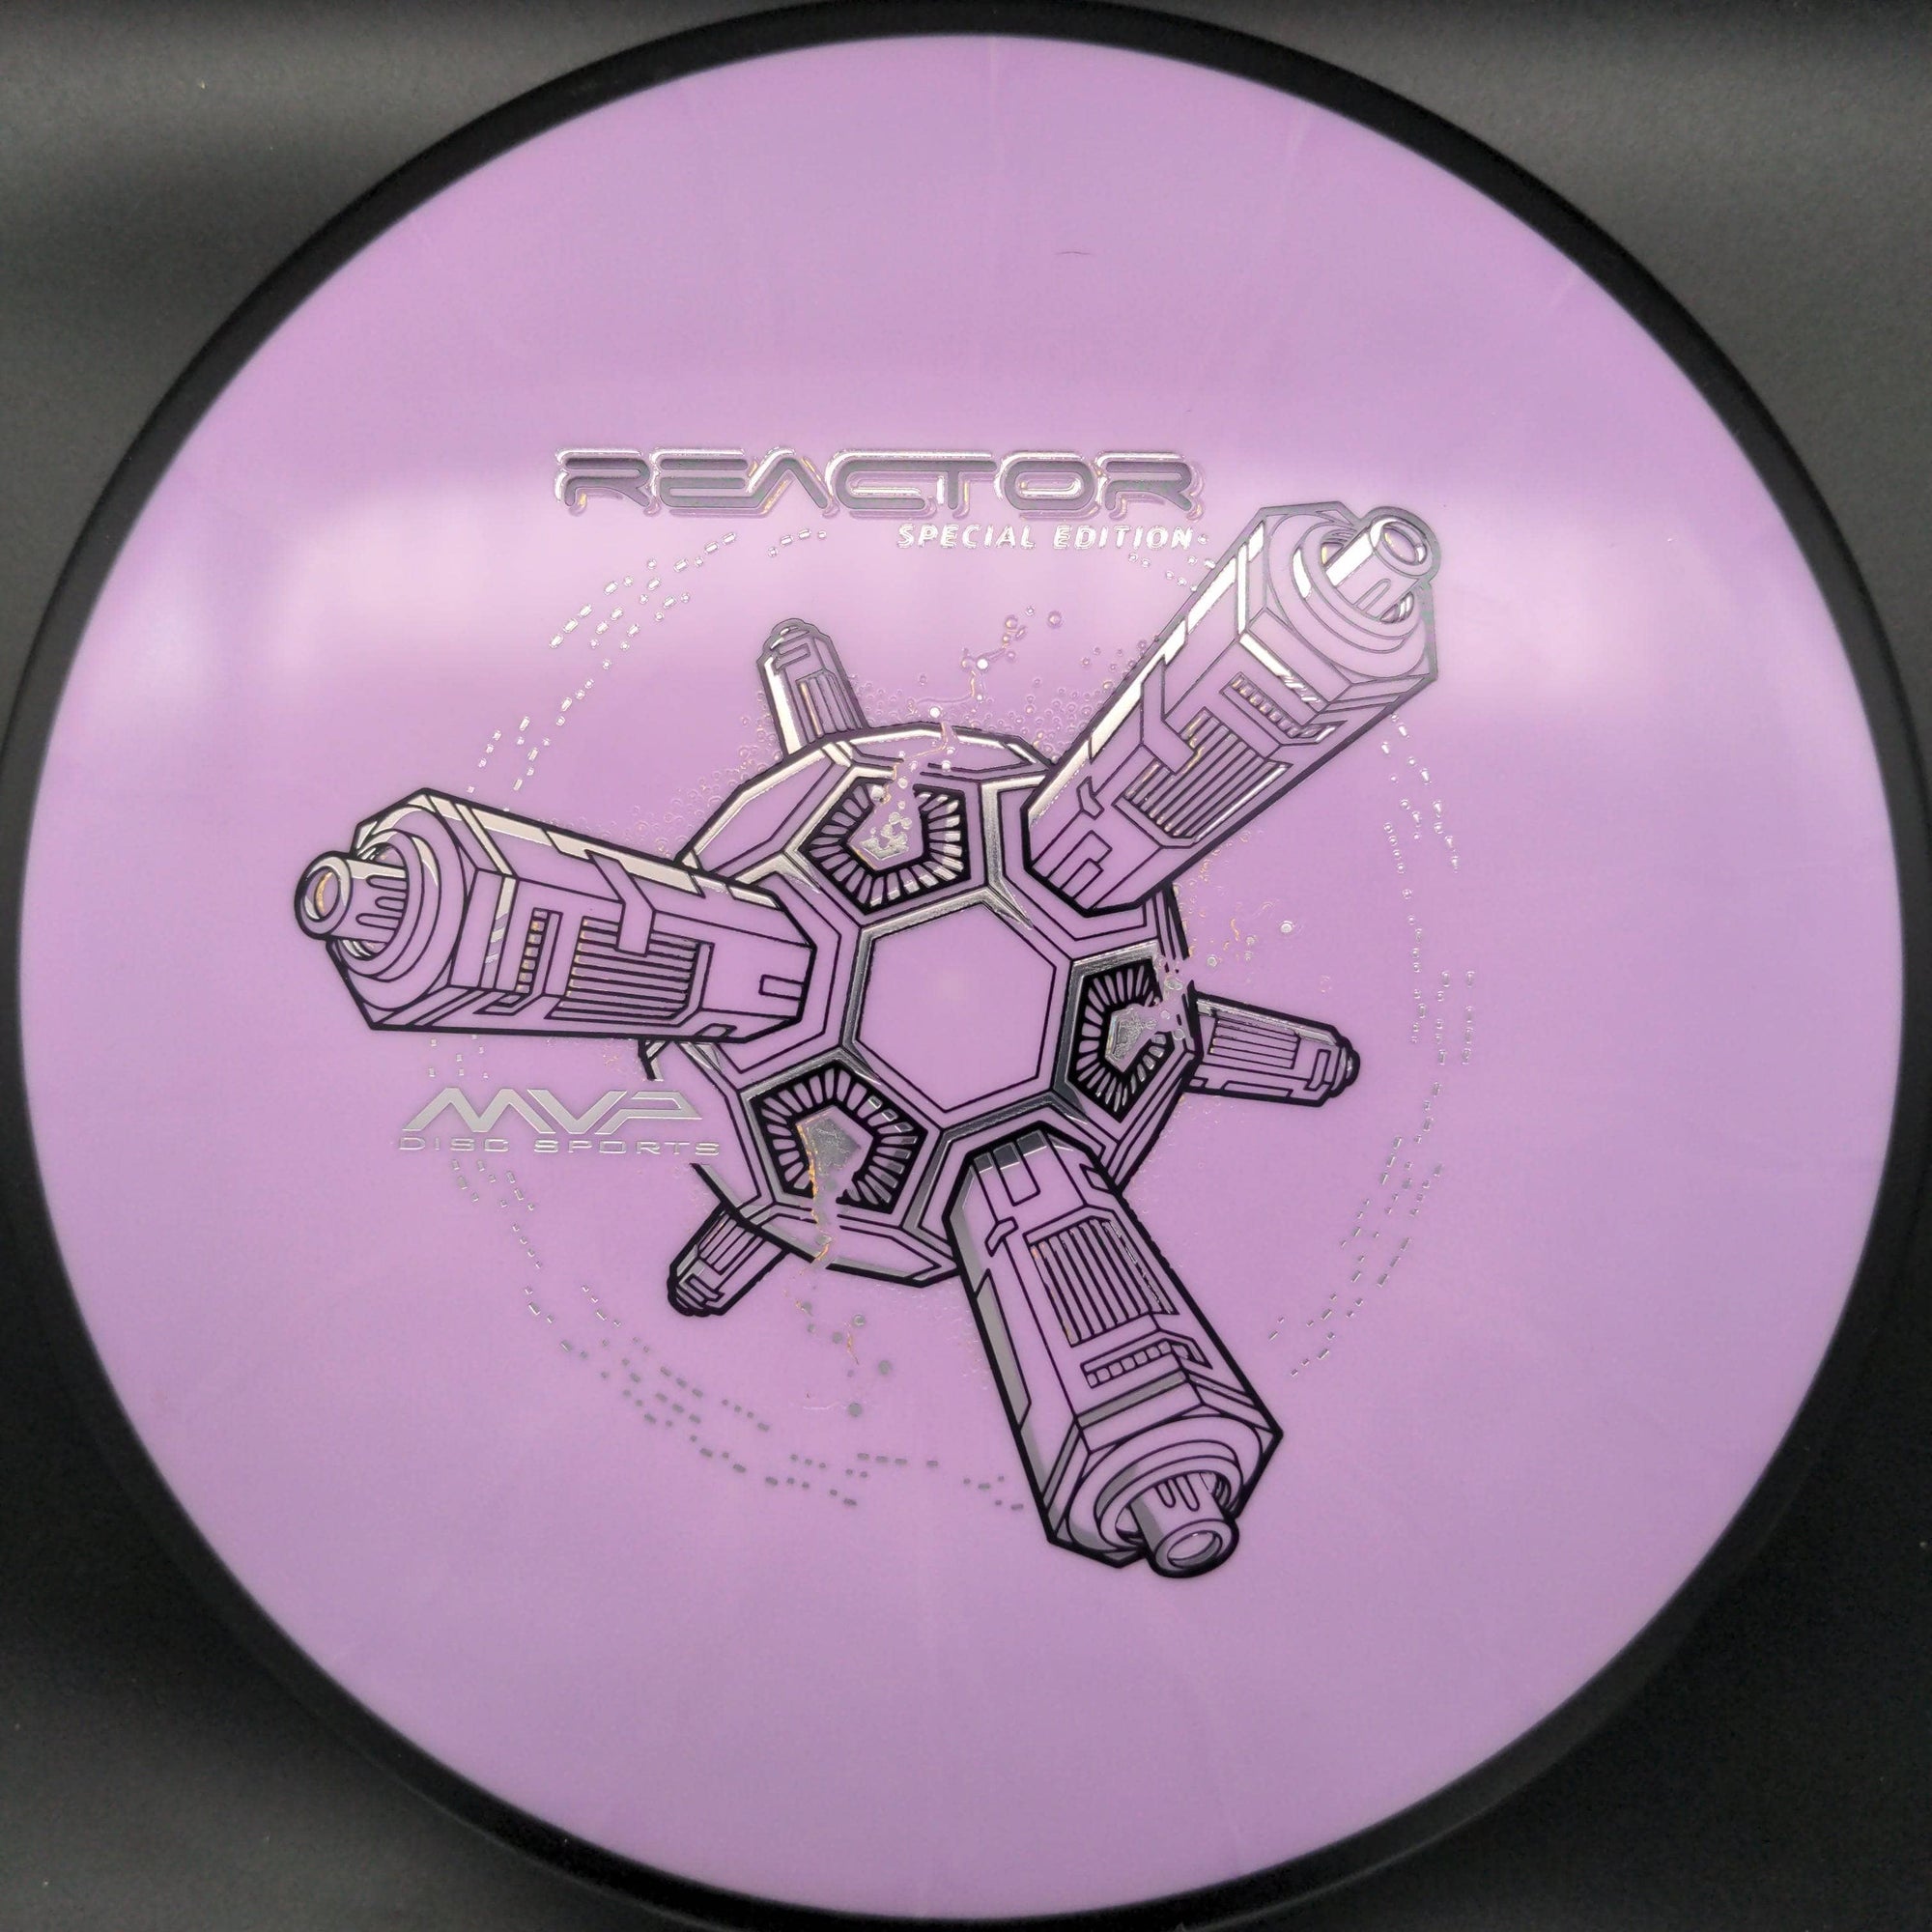 MVP Mid Range Reactor, Fission Special Edition